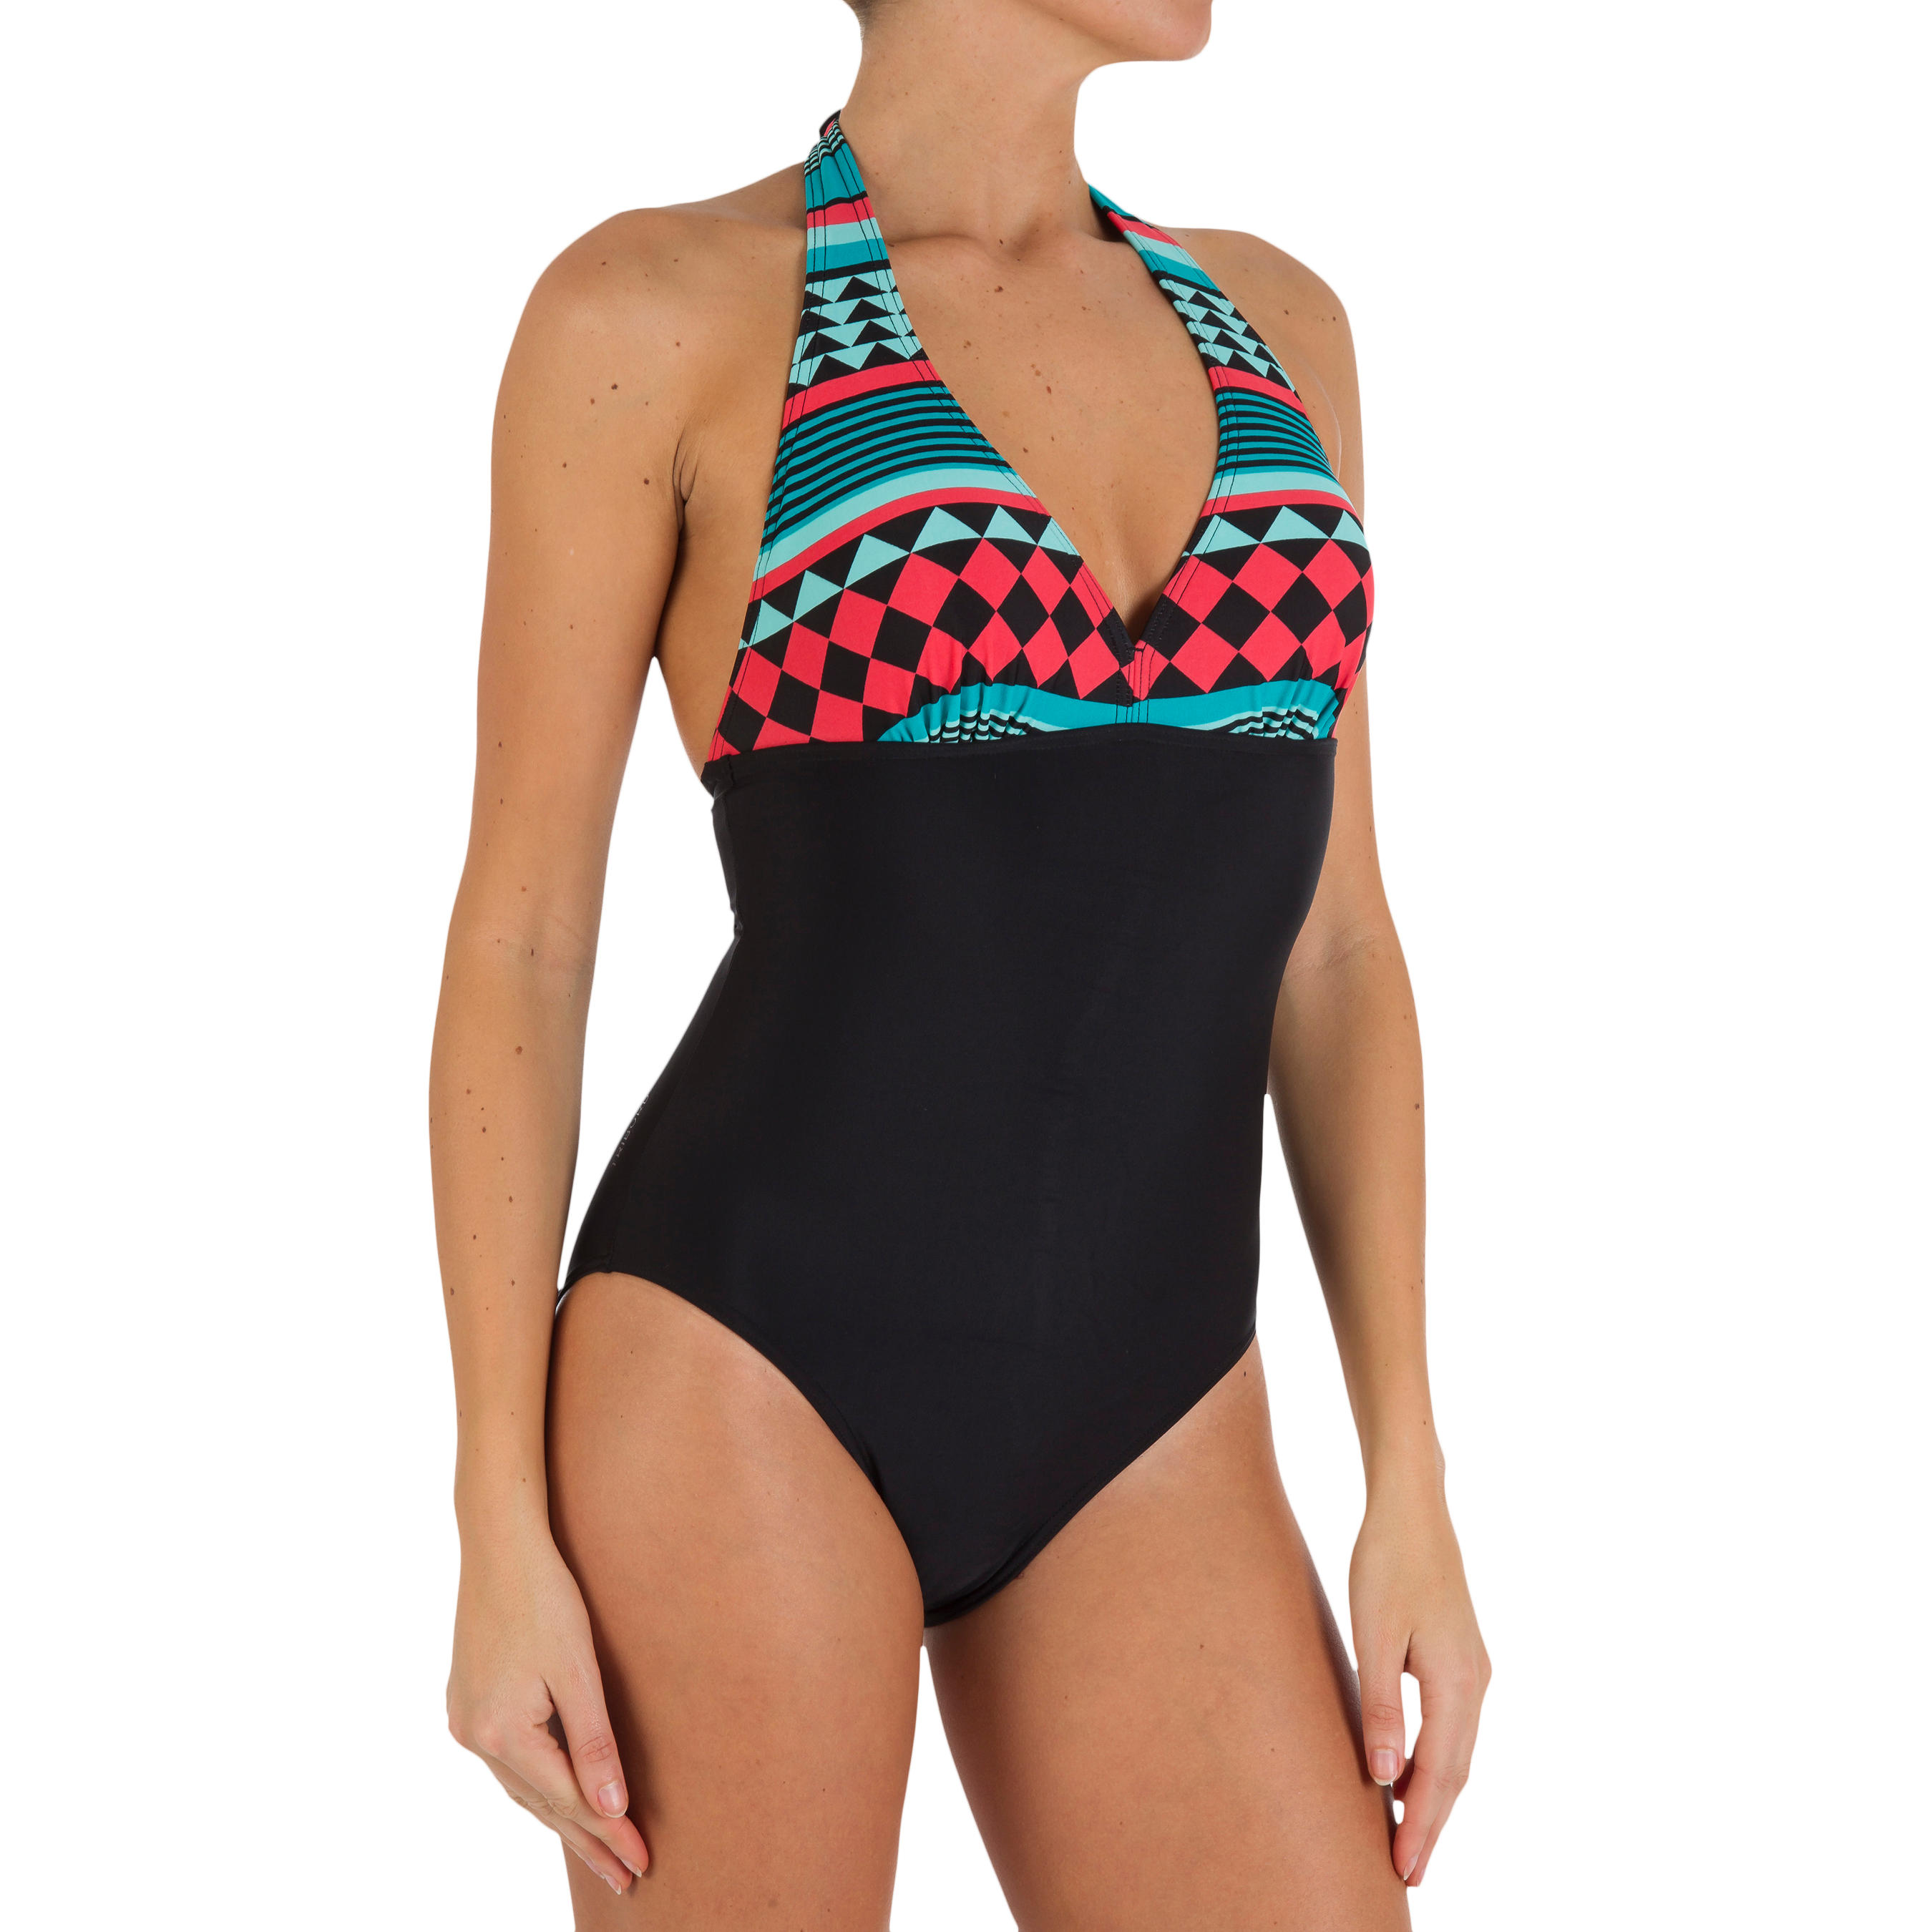 OLAIAN CLEA PORTOFINO women's one-piece halterneck swimsuit with removable padded cups